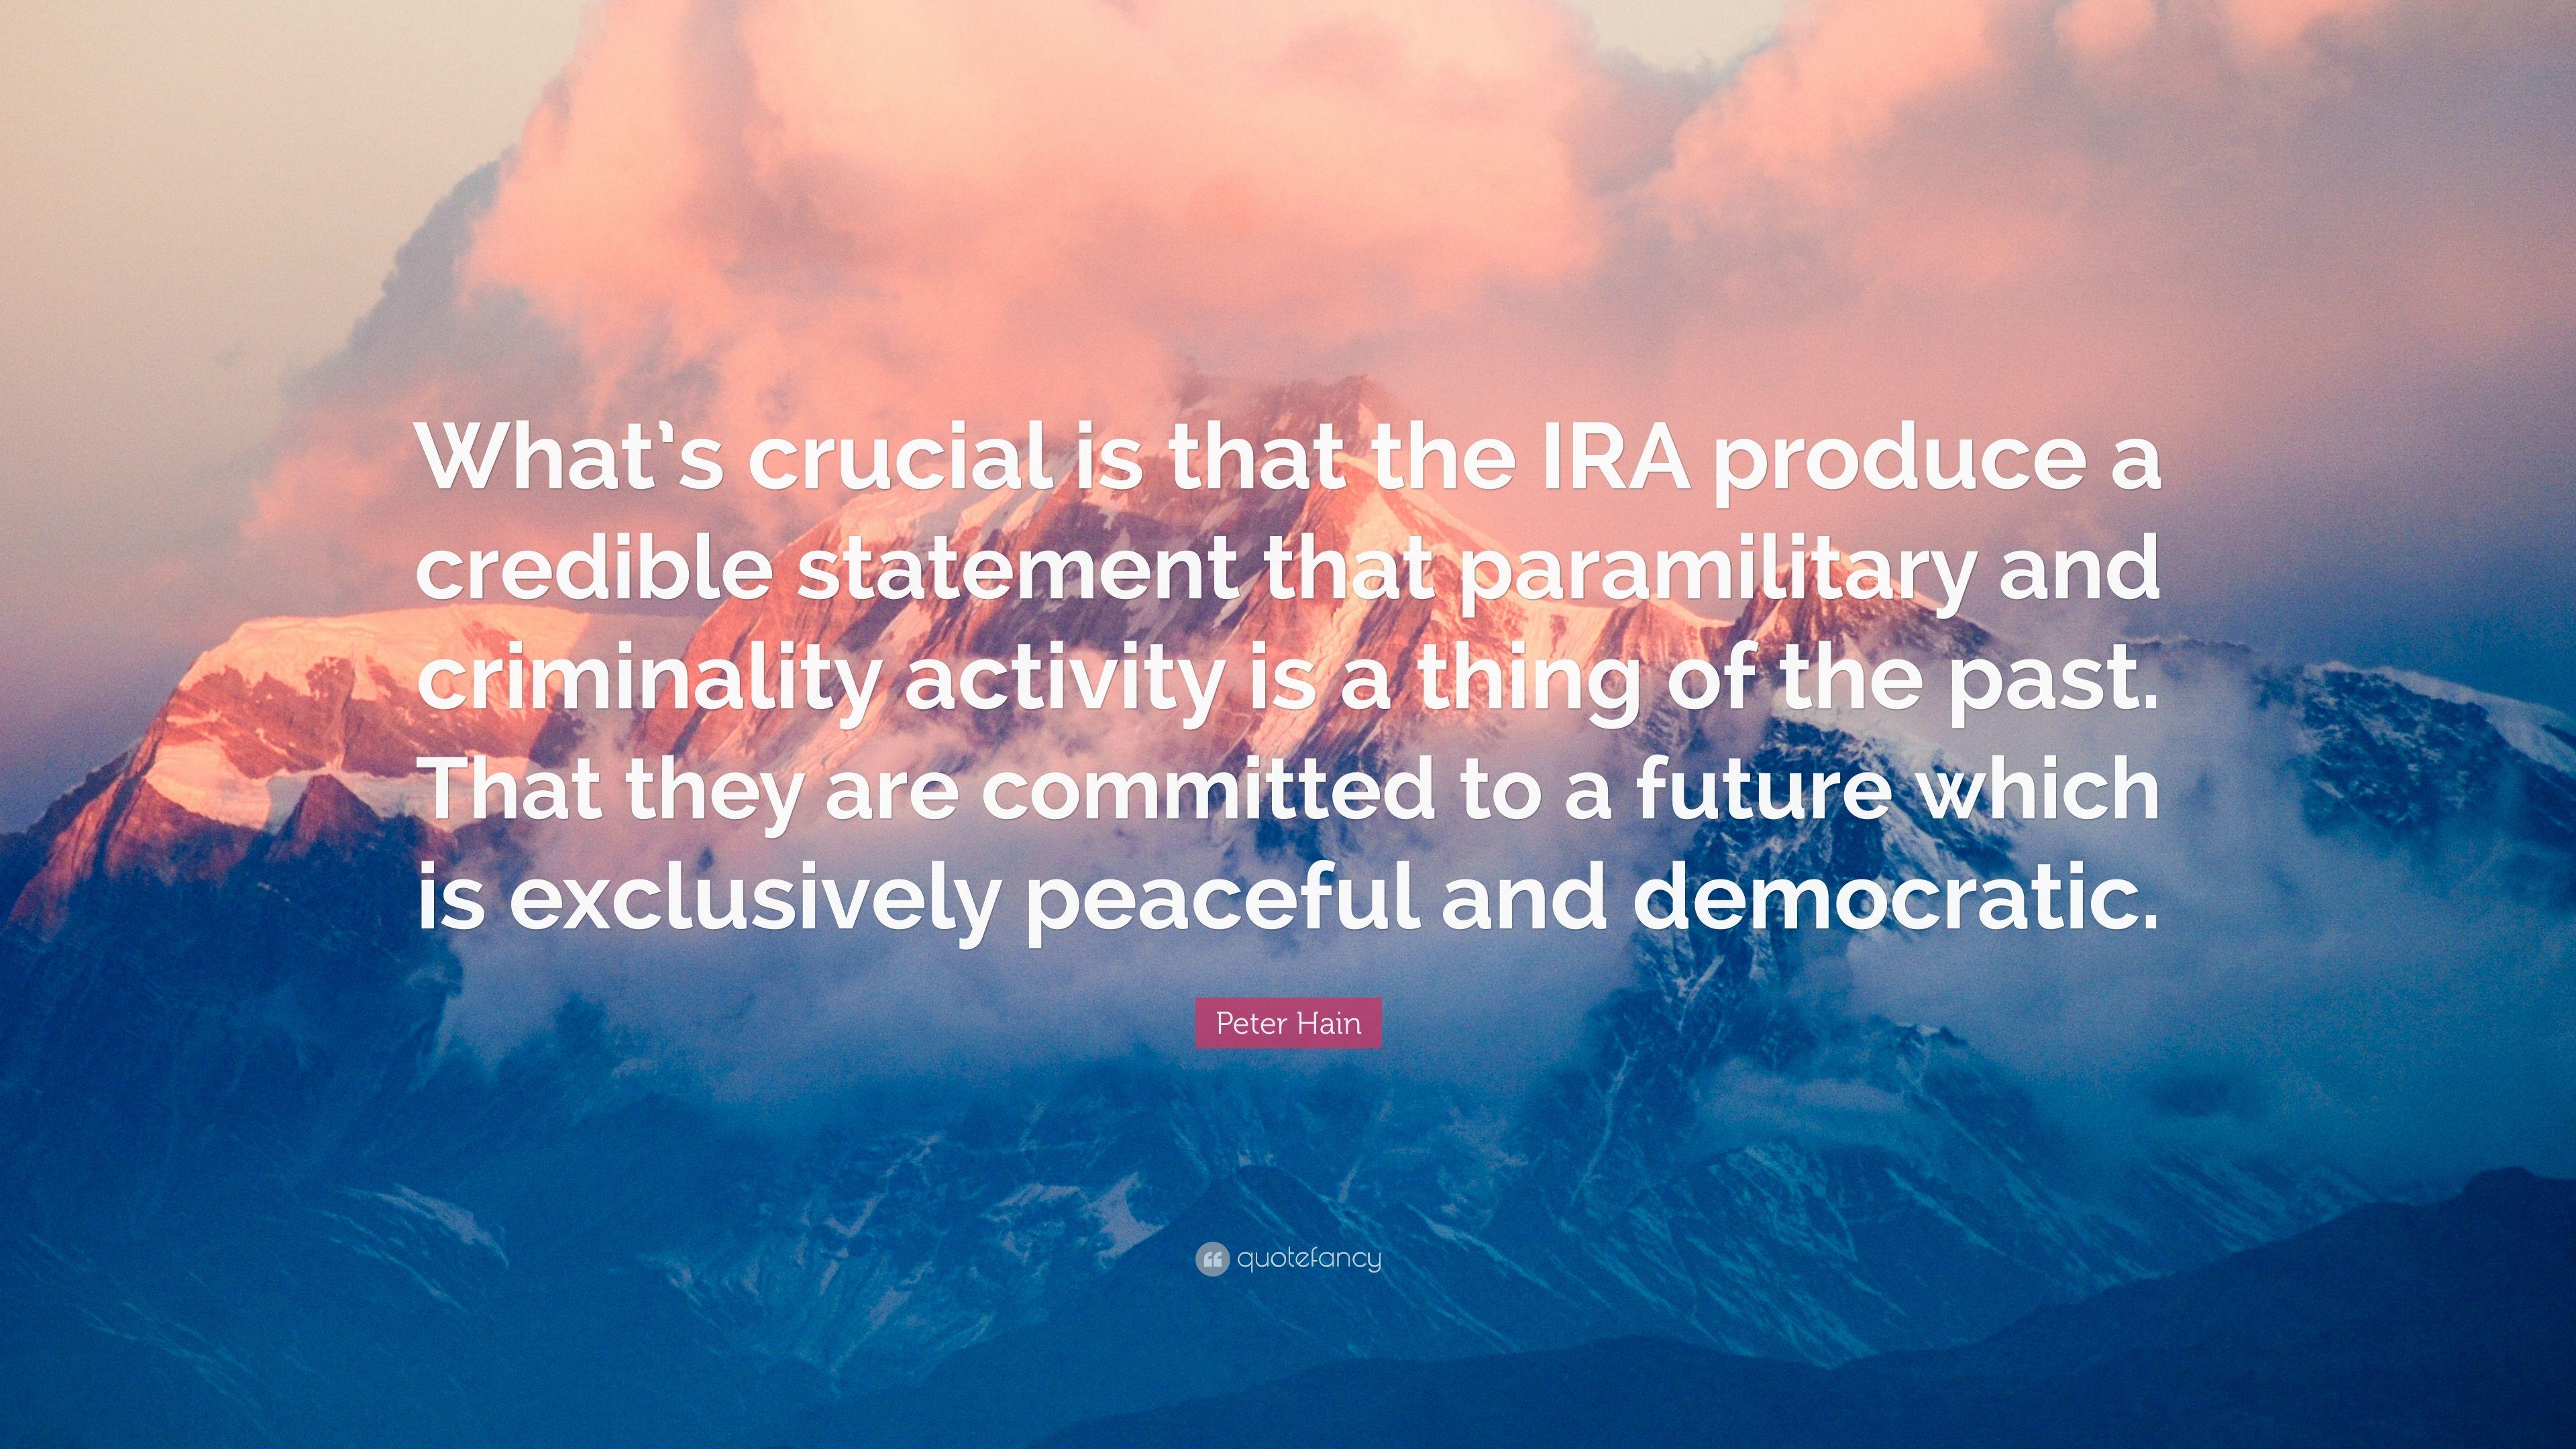 Peter Hain Quote: “What's crucial is that the IRA produce a credible